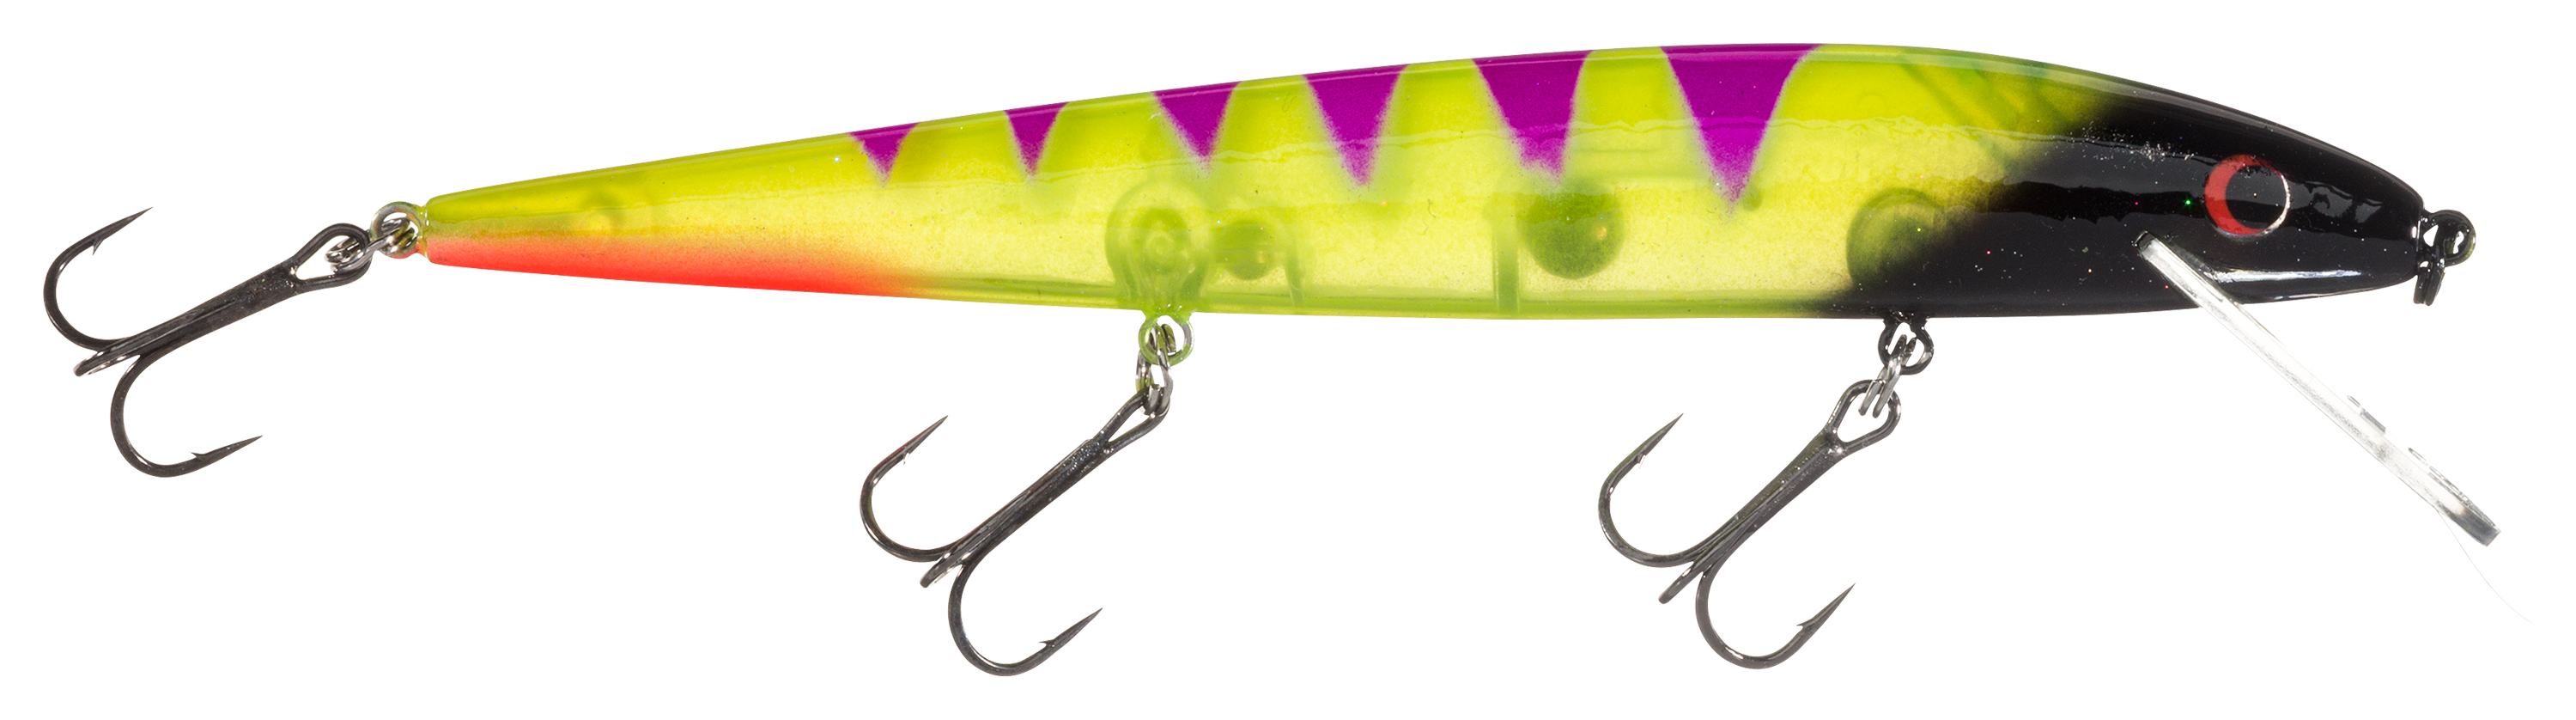 Warrior Lures Custom Painted Smithwick Perfect 10 Rogue